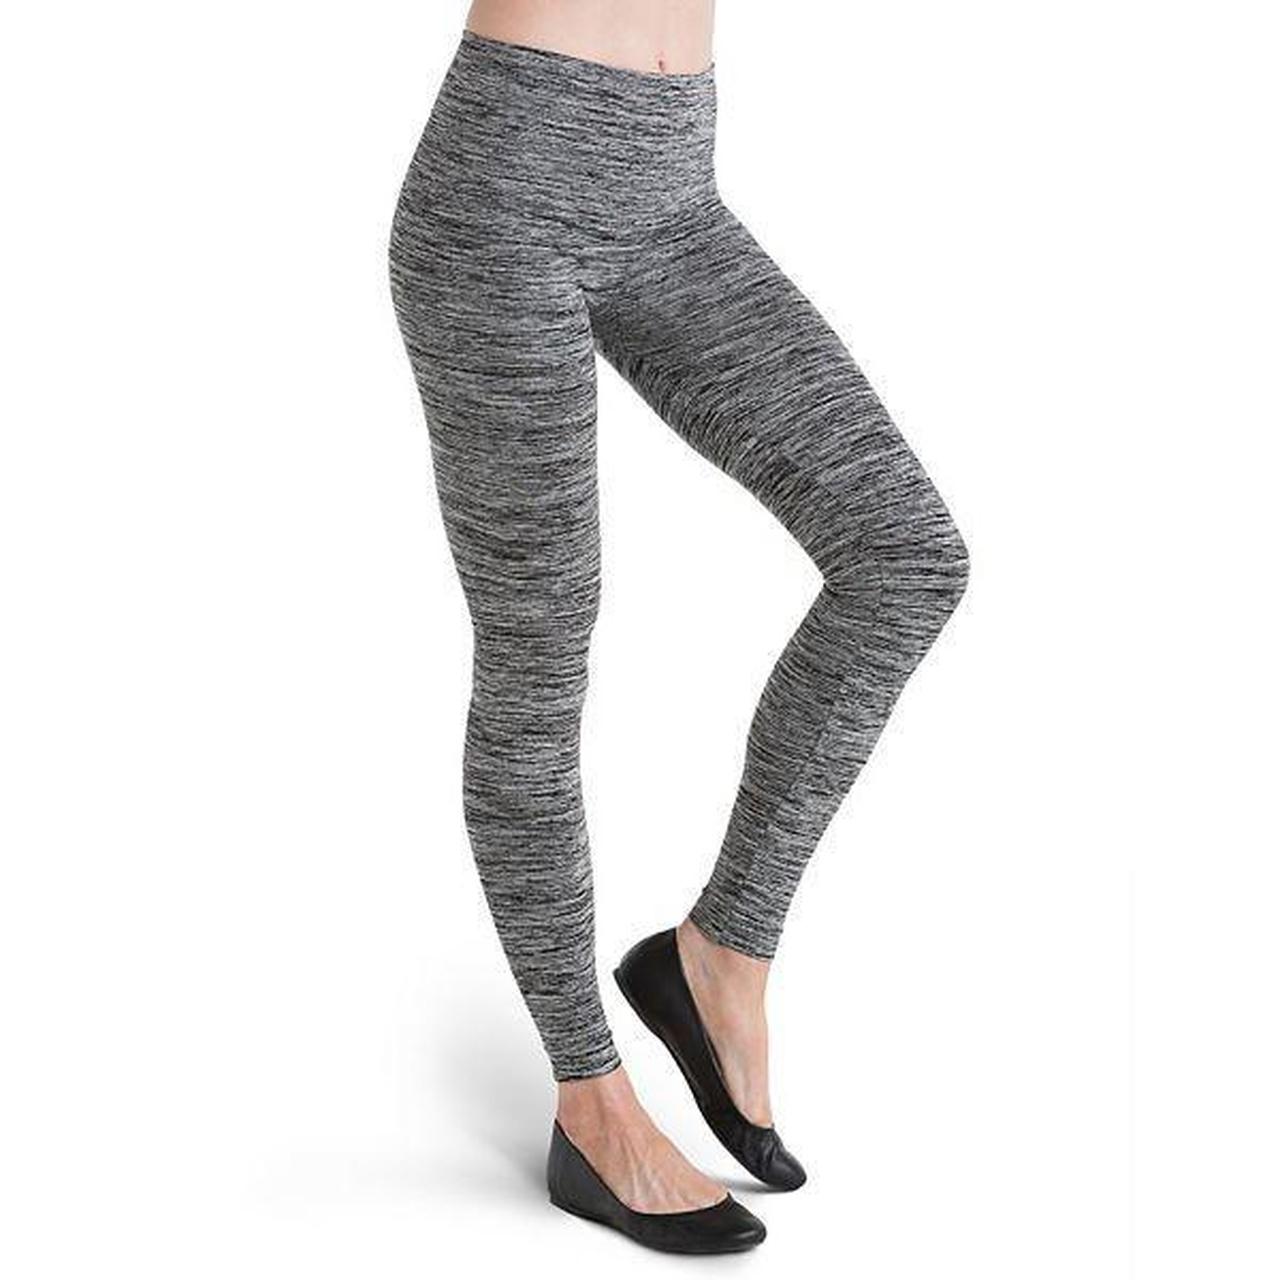 💣2 Pairs! ASSETS By SPANX Woman's High Waist Seamless Leggings~ M/L💣 |  eBay